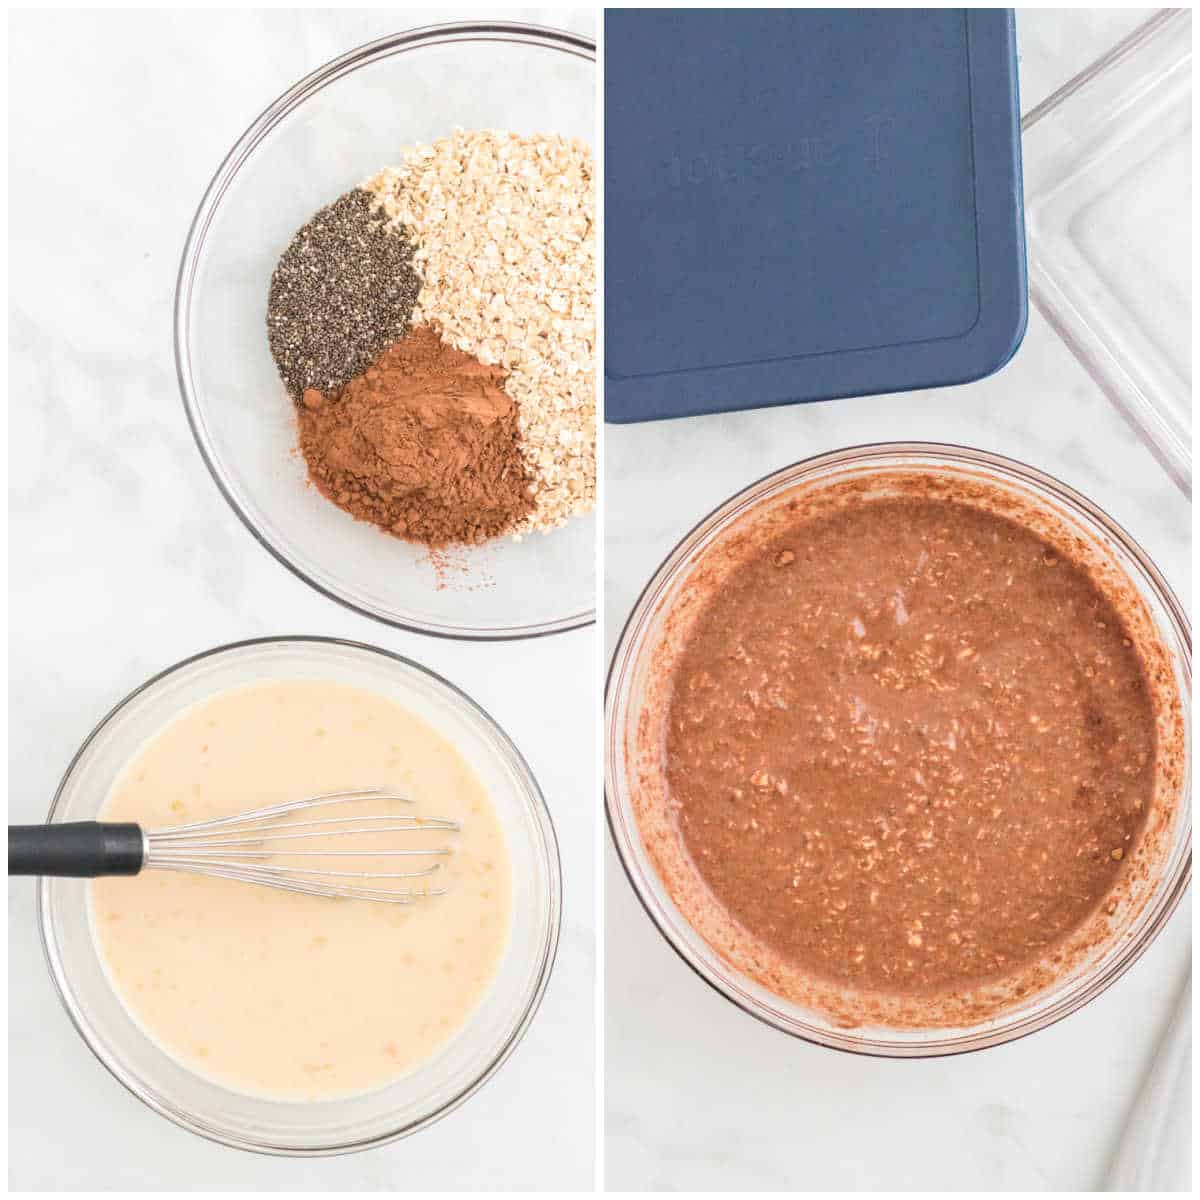 Steps to make chocolate peanut butter overnight oats.